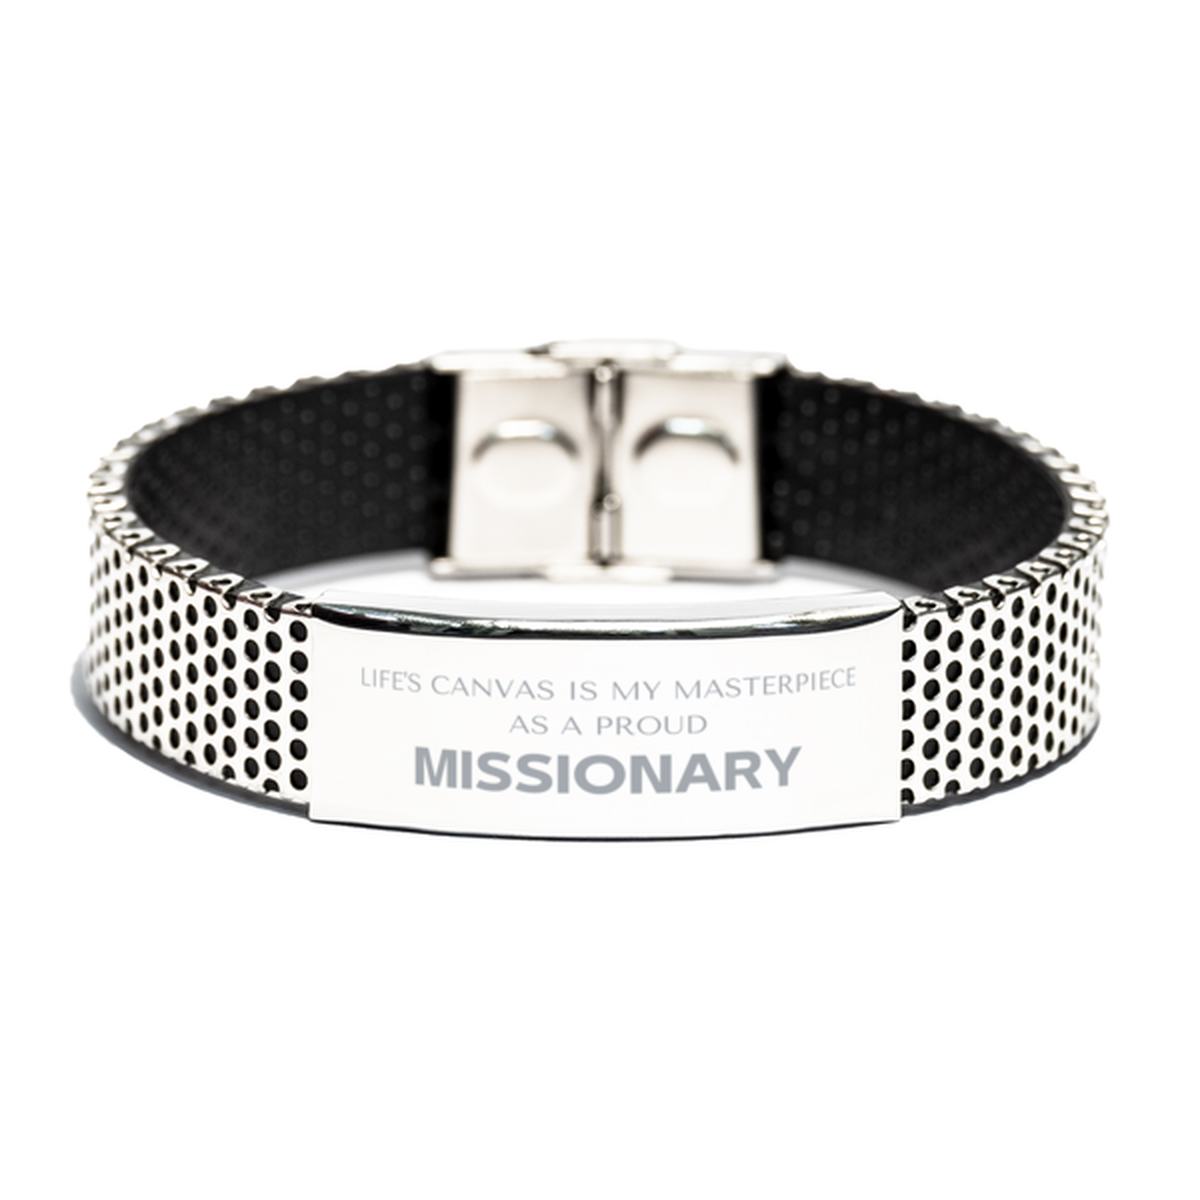 Proud Missionary Gifts, Life's canvas is my masterpiece, Epic Birthday Christmas Unique Stainless Steel Bracelet For Missionary, Coworkers, Men, Women, Friends